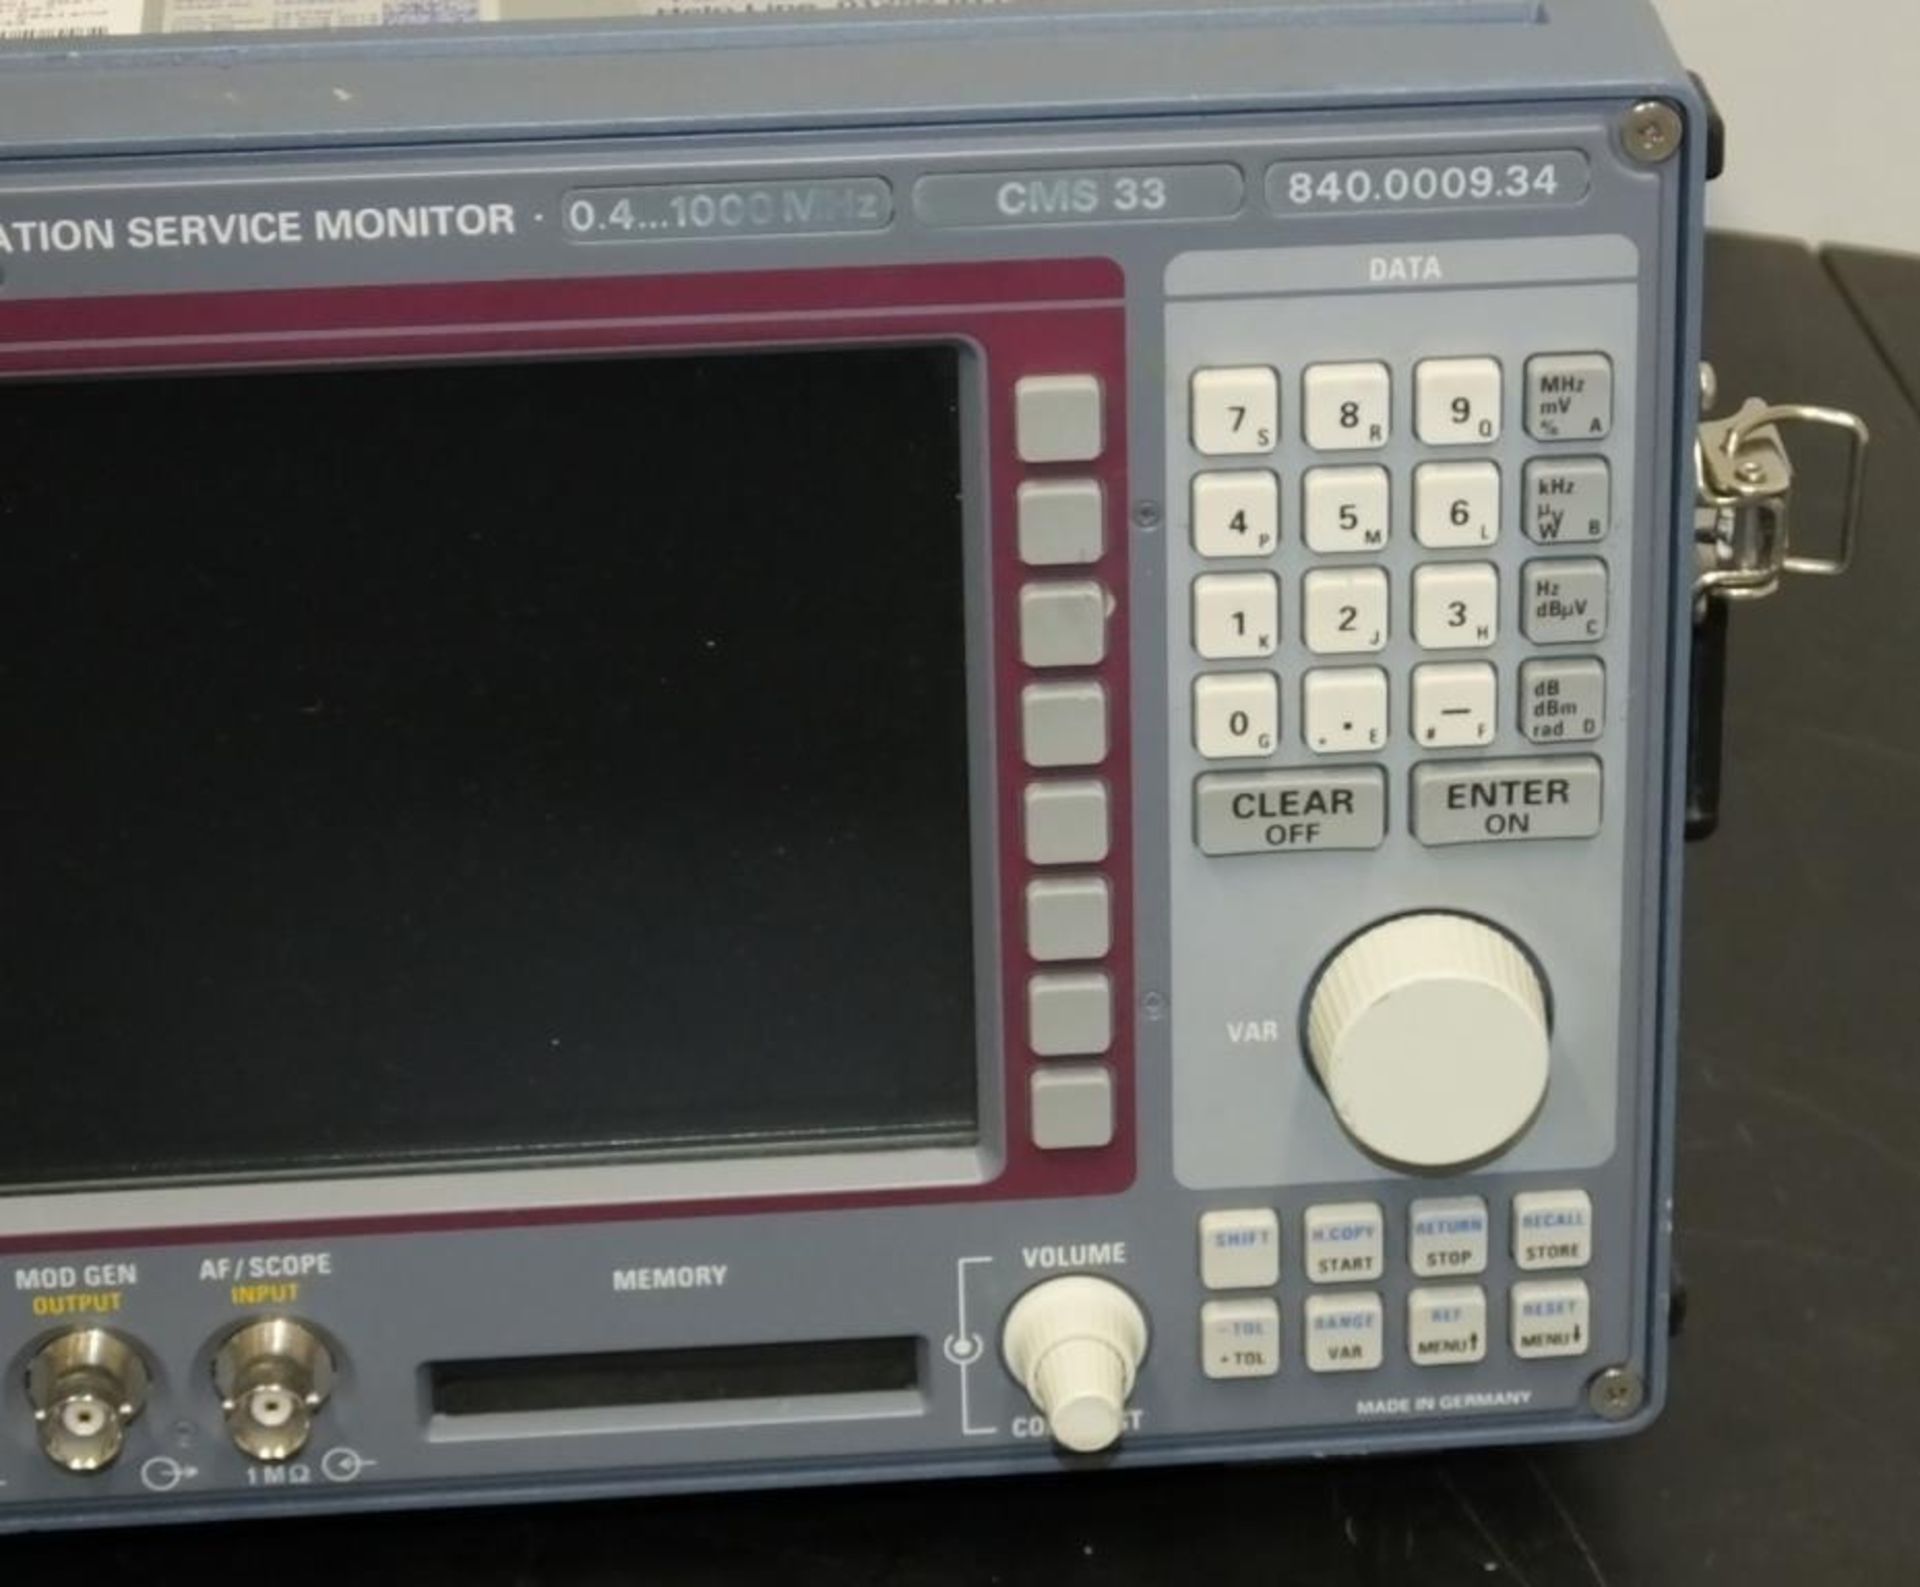 Rohde & Schwarz Radio Communications monitor 0.4 - 1000mhz - CMS33 - 840.0009.34, antenna base in co - Image 4 of 9